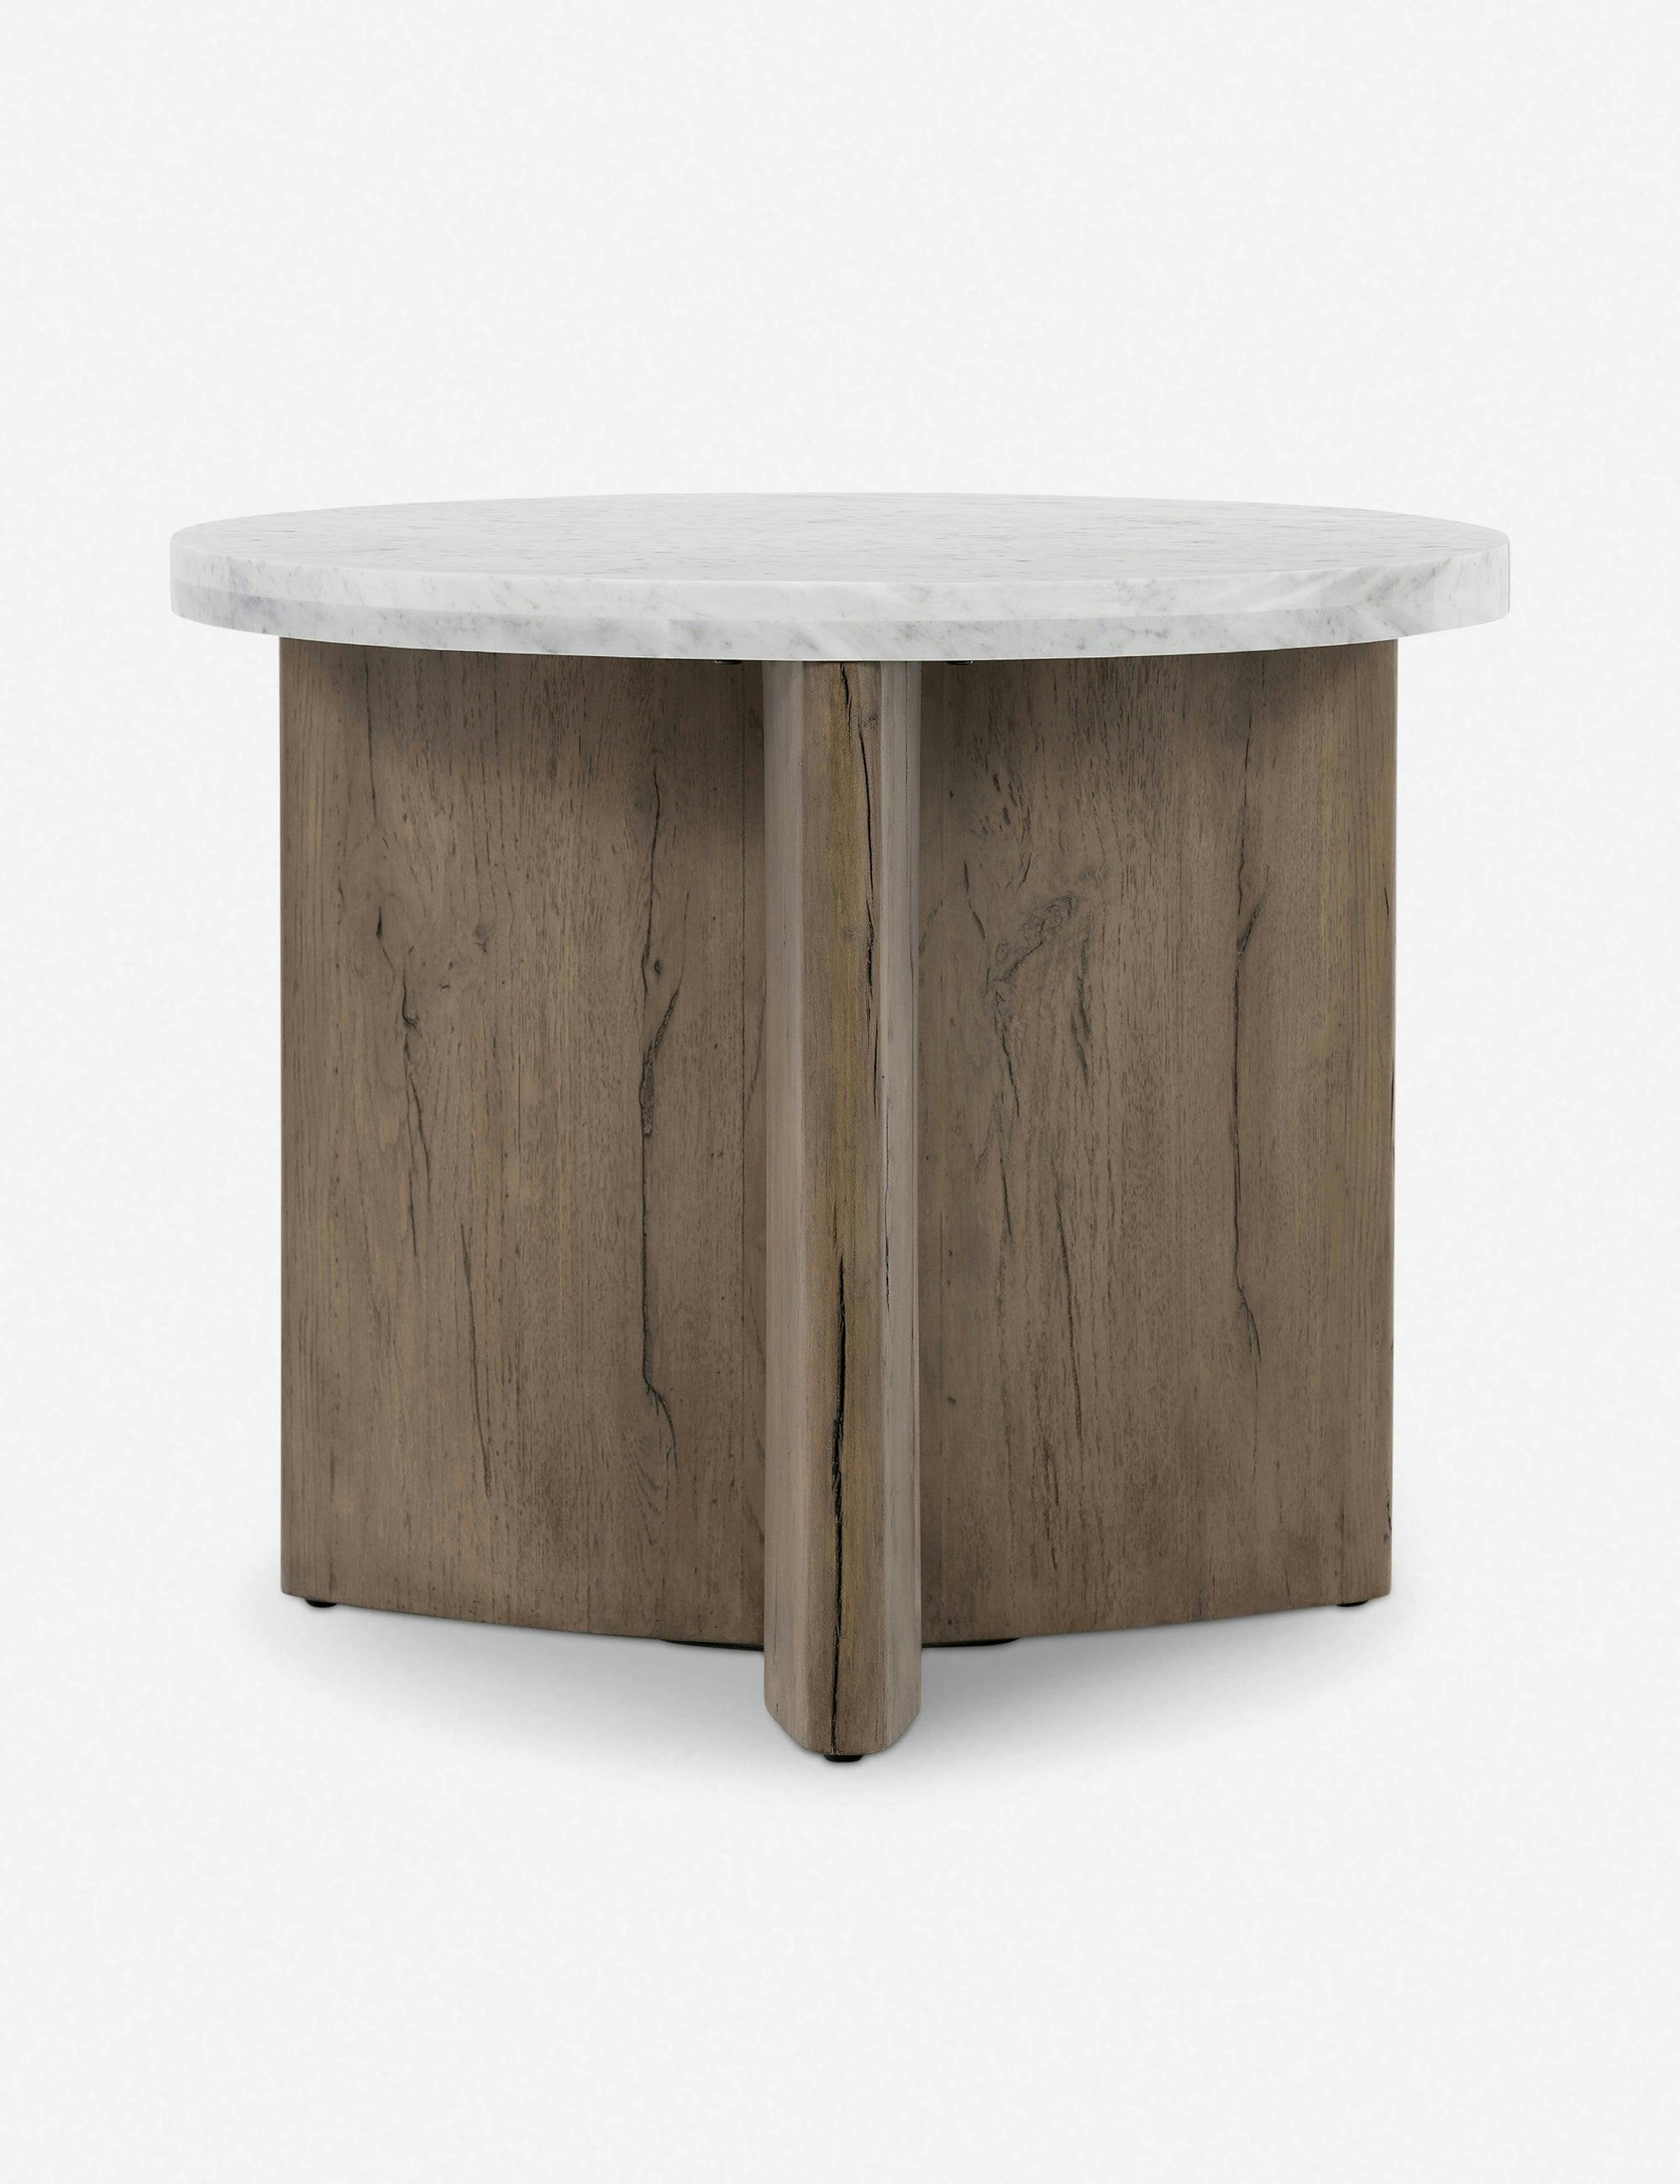 Voss Round Italian White Marble Side Table